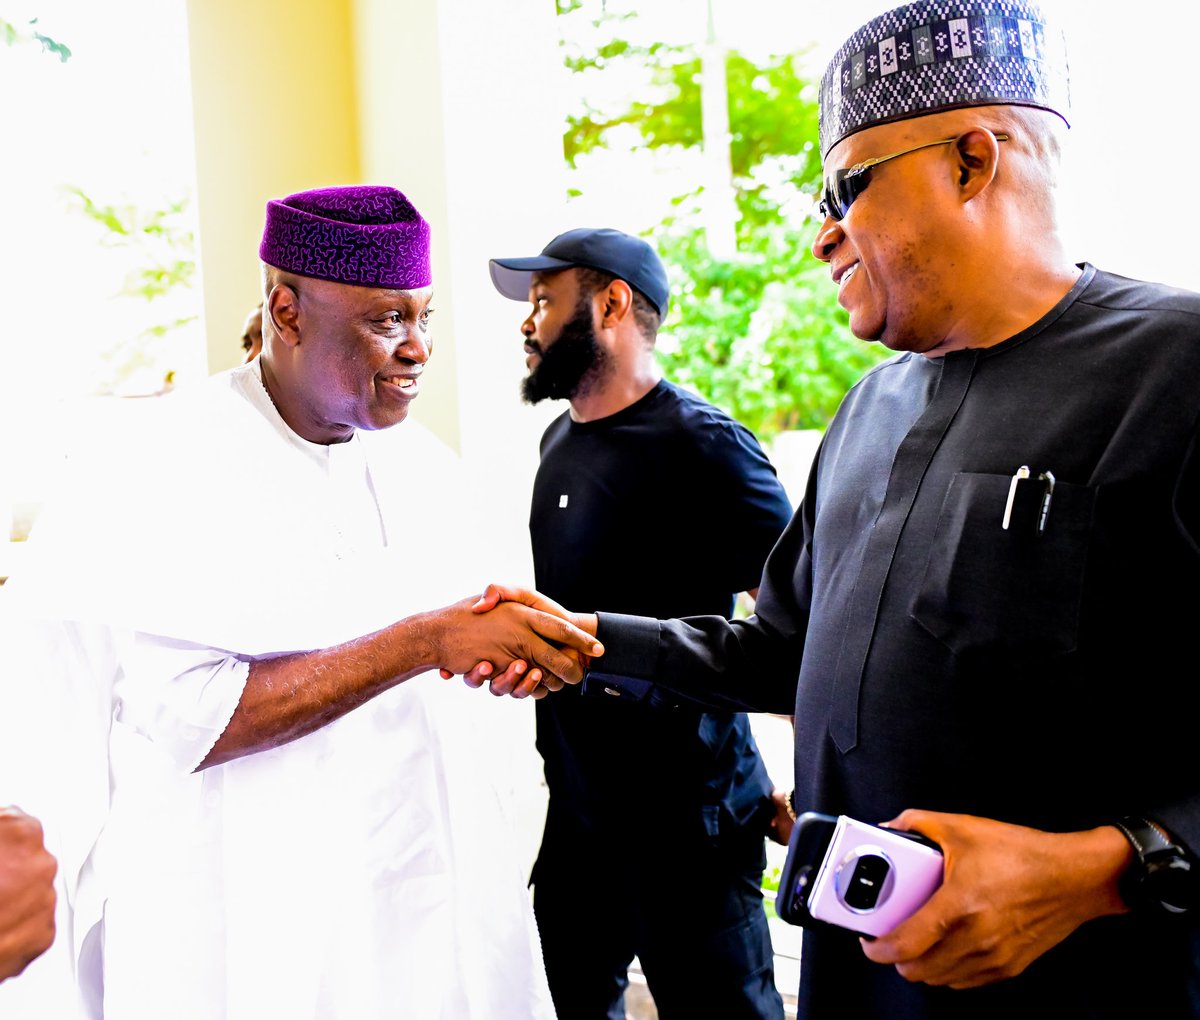 Governor Biodun Oyebanji Saturday evening paid a courtesy visit to the President- elect, H.E. Asiwaju Bola Ahmed Tinubu at his official residence, Abuja, ahead of the May 29, inauguration. #BAOtheleaderwetrust #Presidentelect #Renewedhope #ekitionthemove